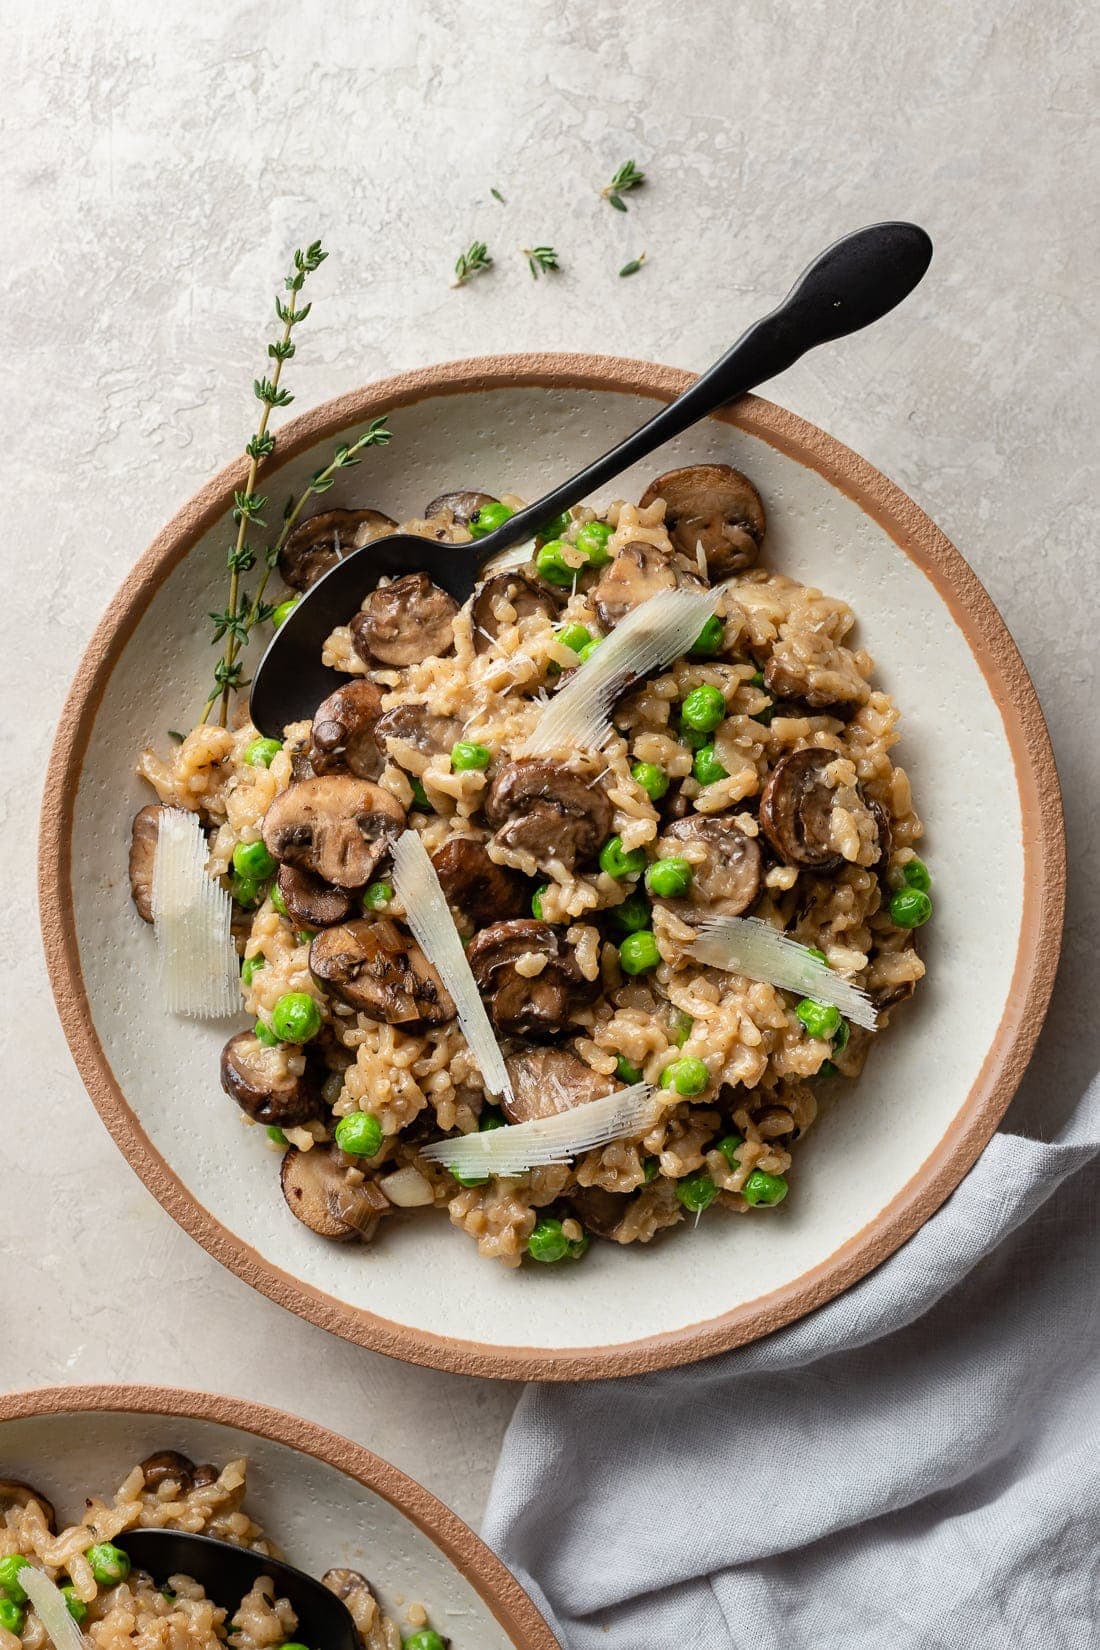 A bowl of mushroom risotto made in the Instant Pot with peas, Parmesan, and a garnish of fresh thyme.